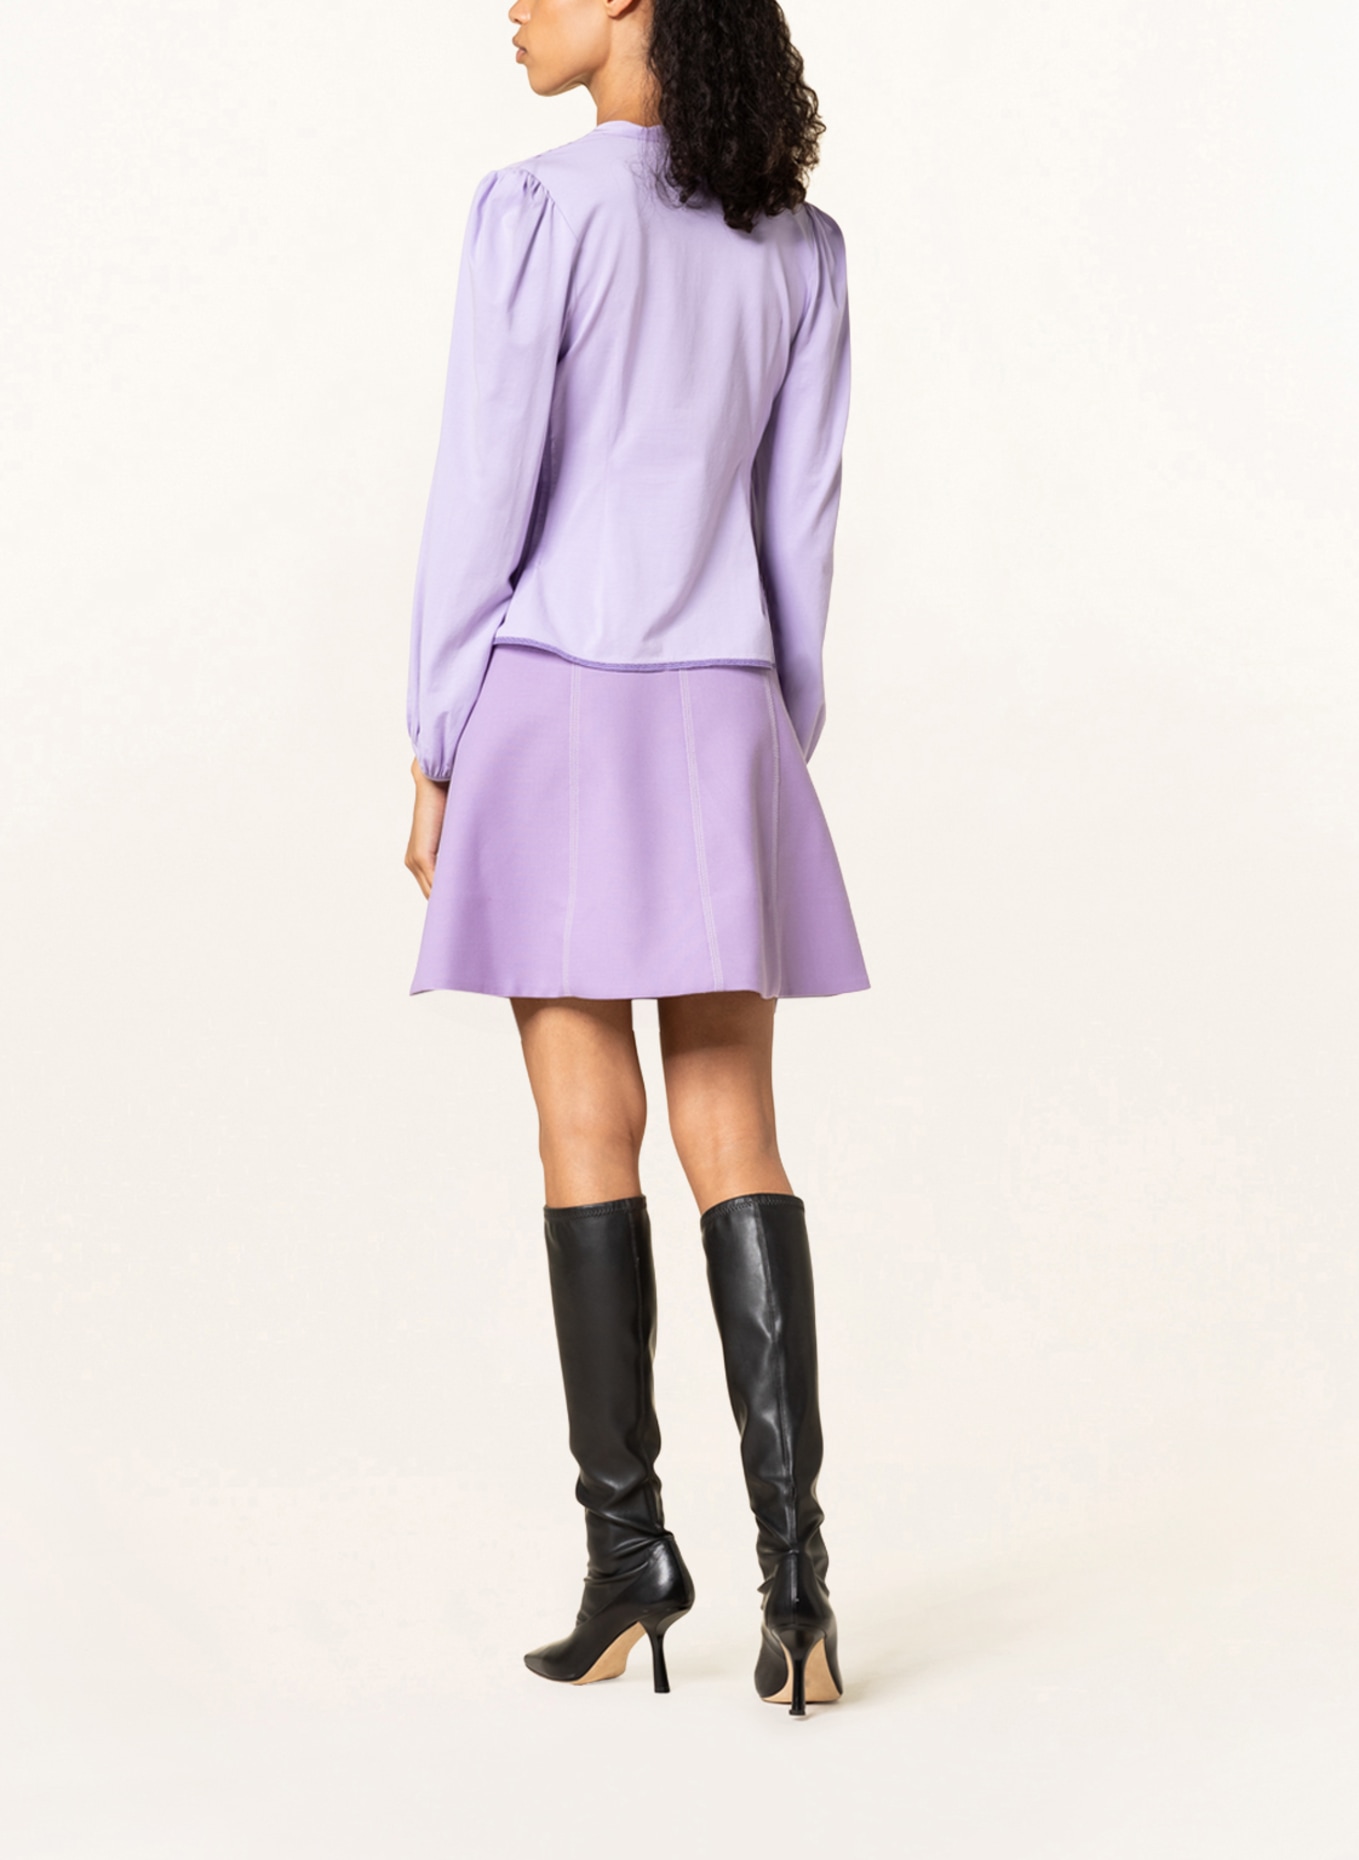 DOROTHEE SCHUMACHER Blouse in mixed materials , Color: LIGHT PURPLE (Image 3)